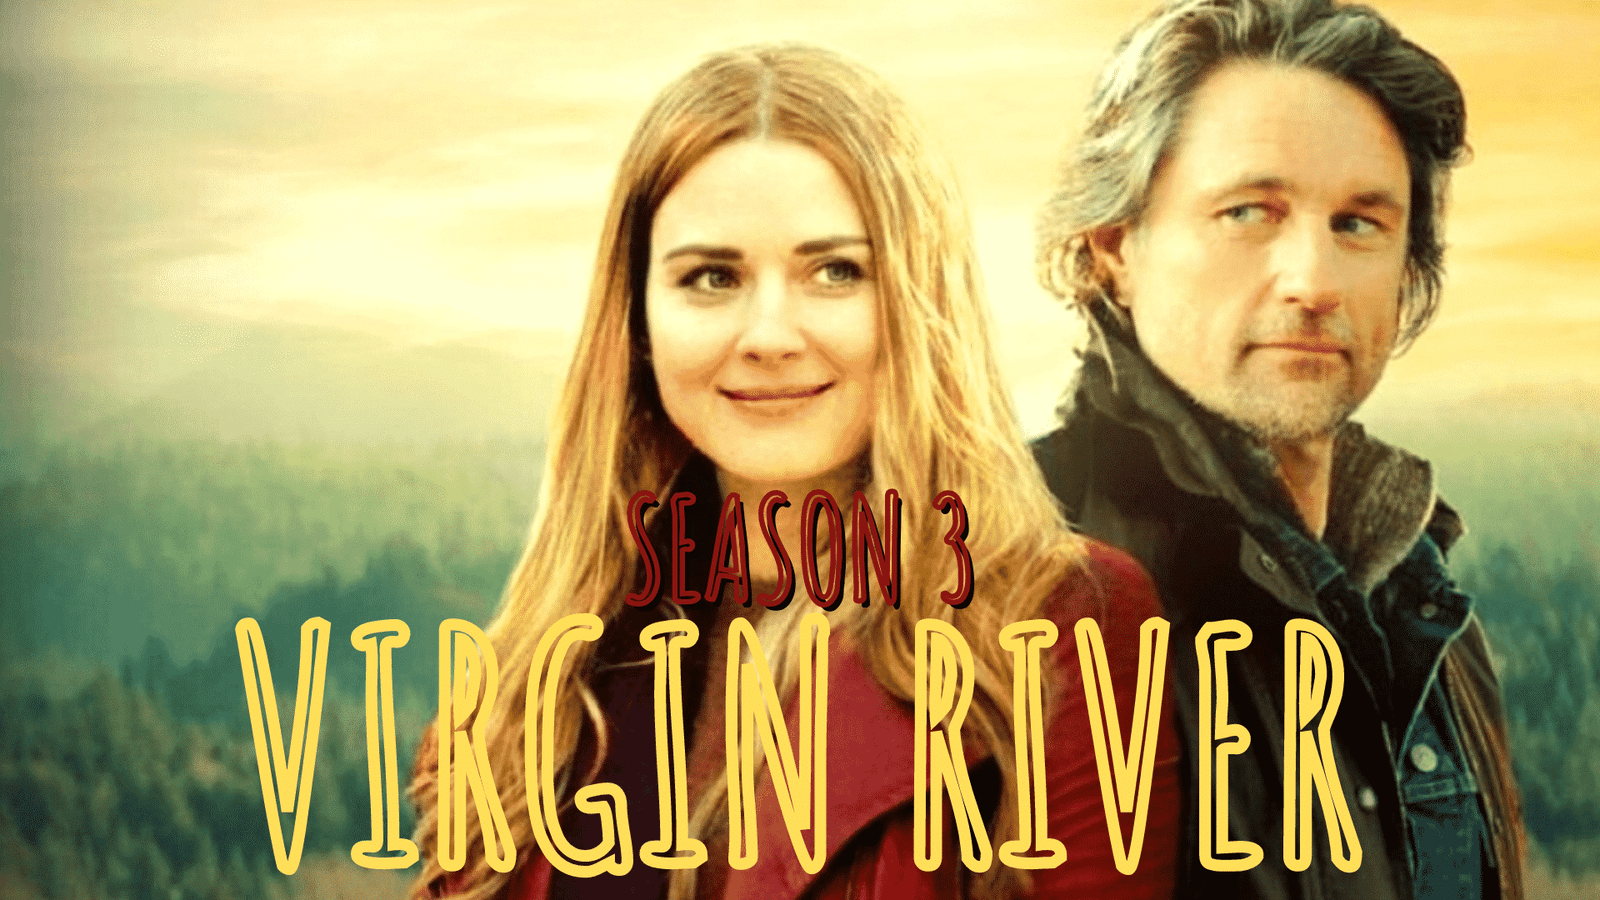 the cast of virgin river